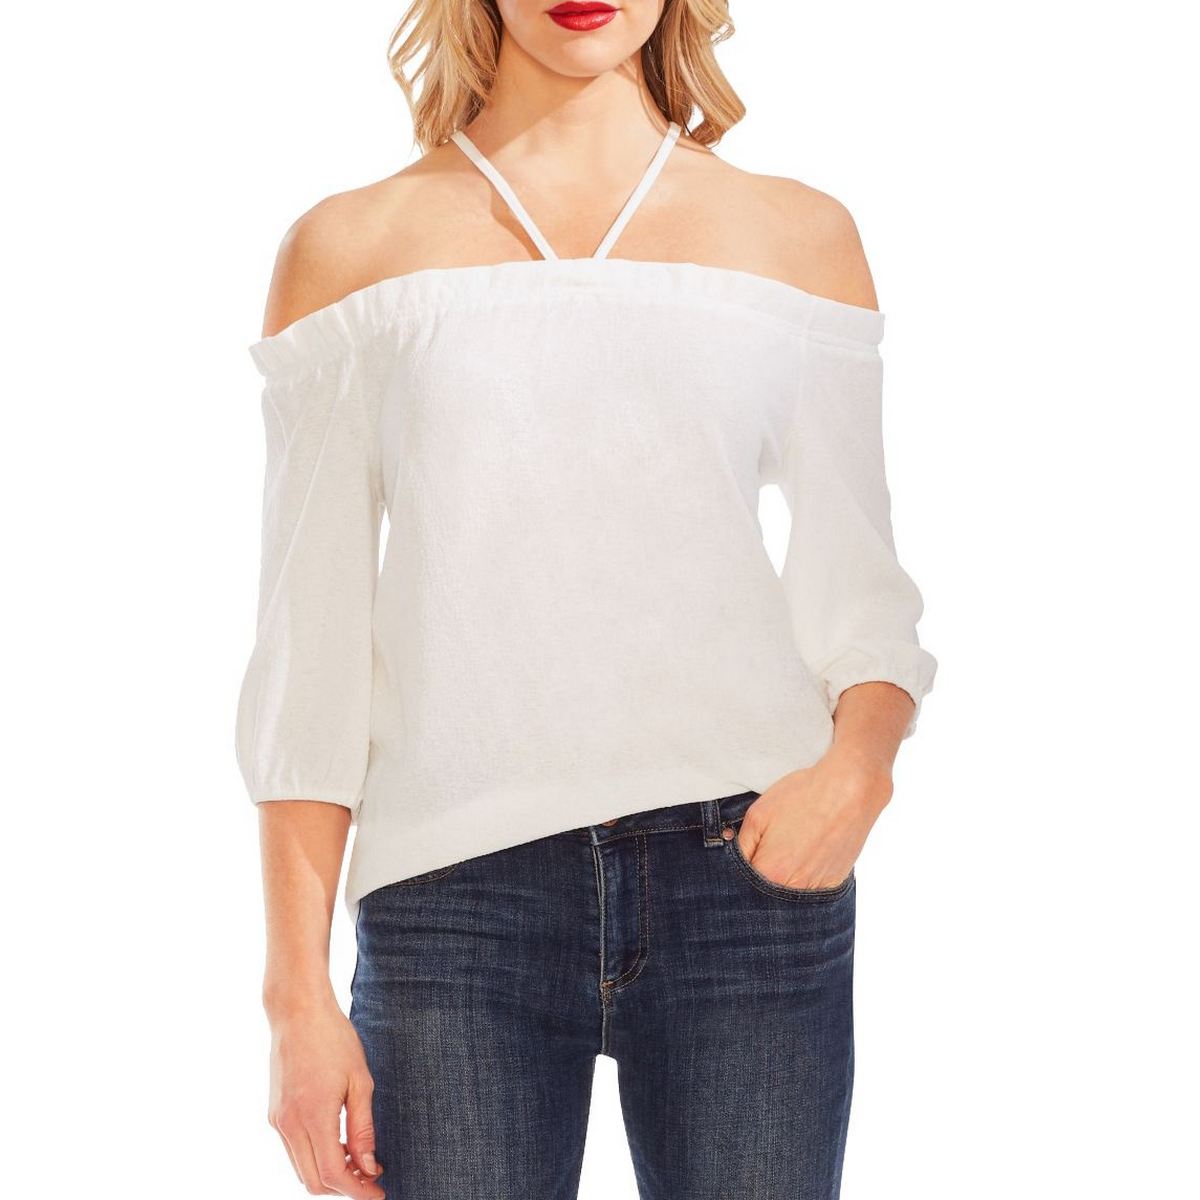 Vince Camuto Womens Ivory Off-the-shoulder Tie Back Shirt Top S 